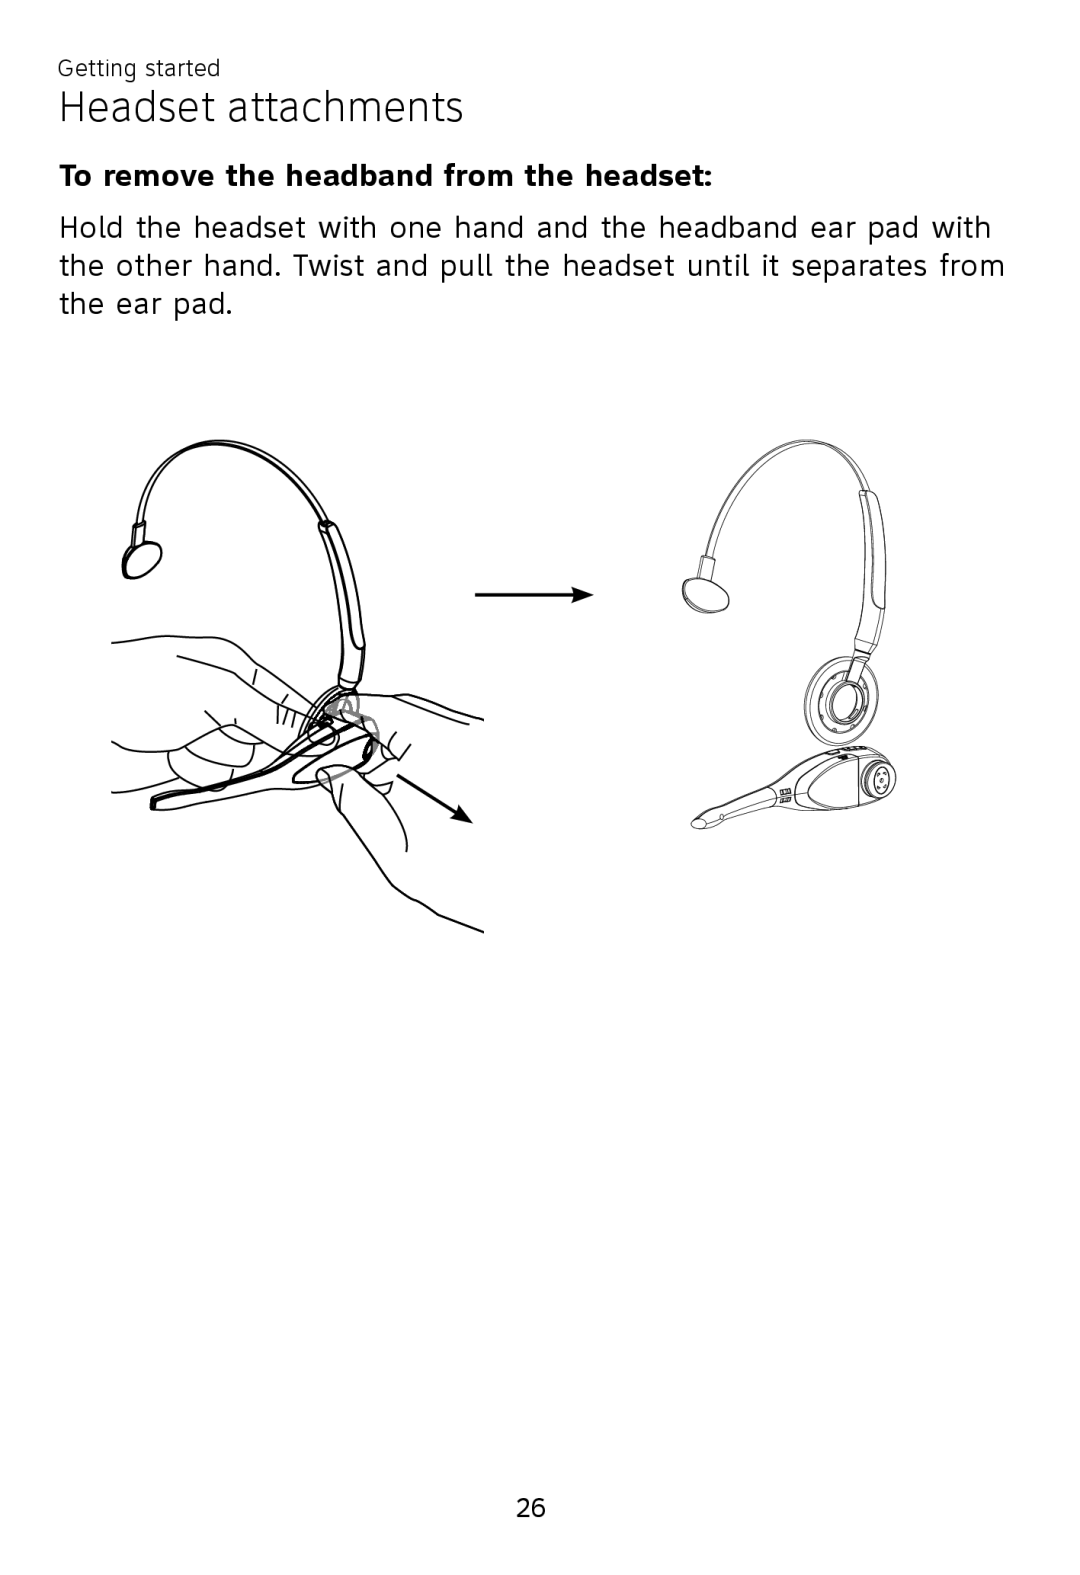 AT&T TL 7610 user manual To remove the headband from the headset, Headset attachments, Getting started 